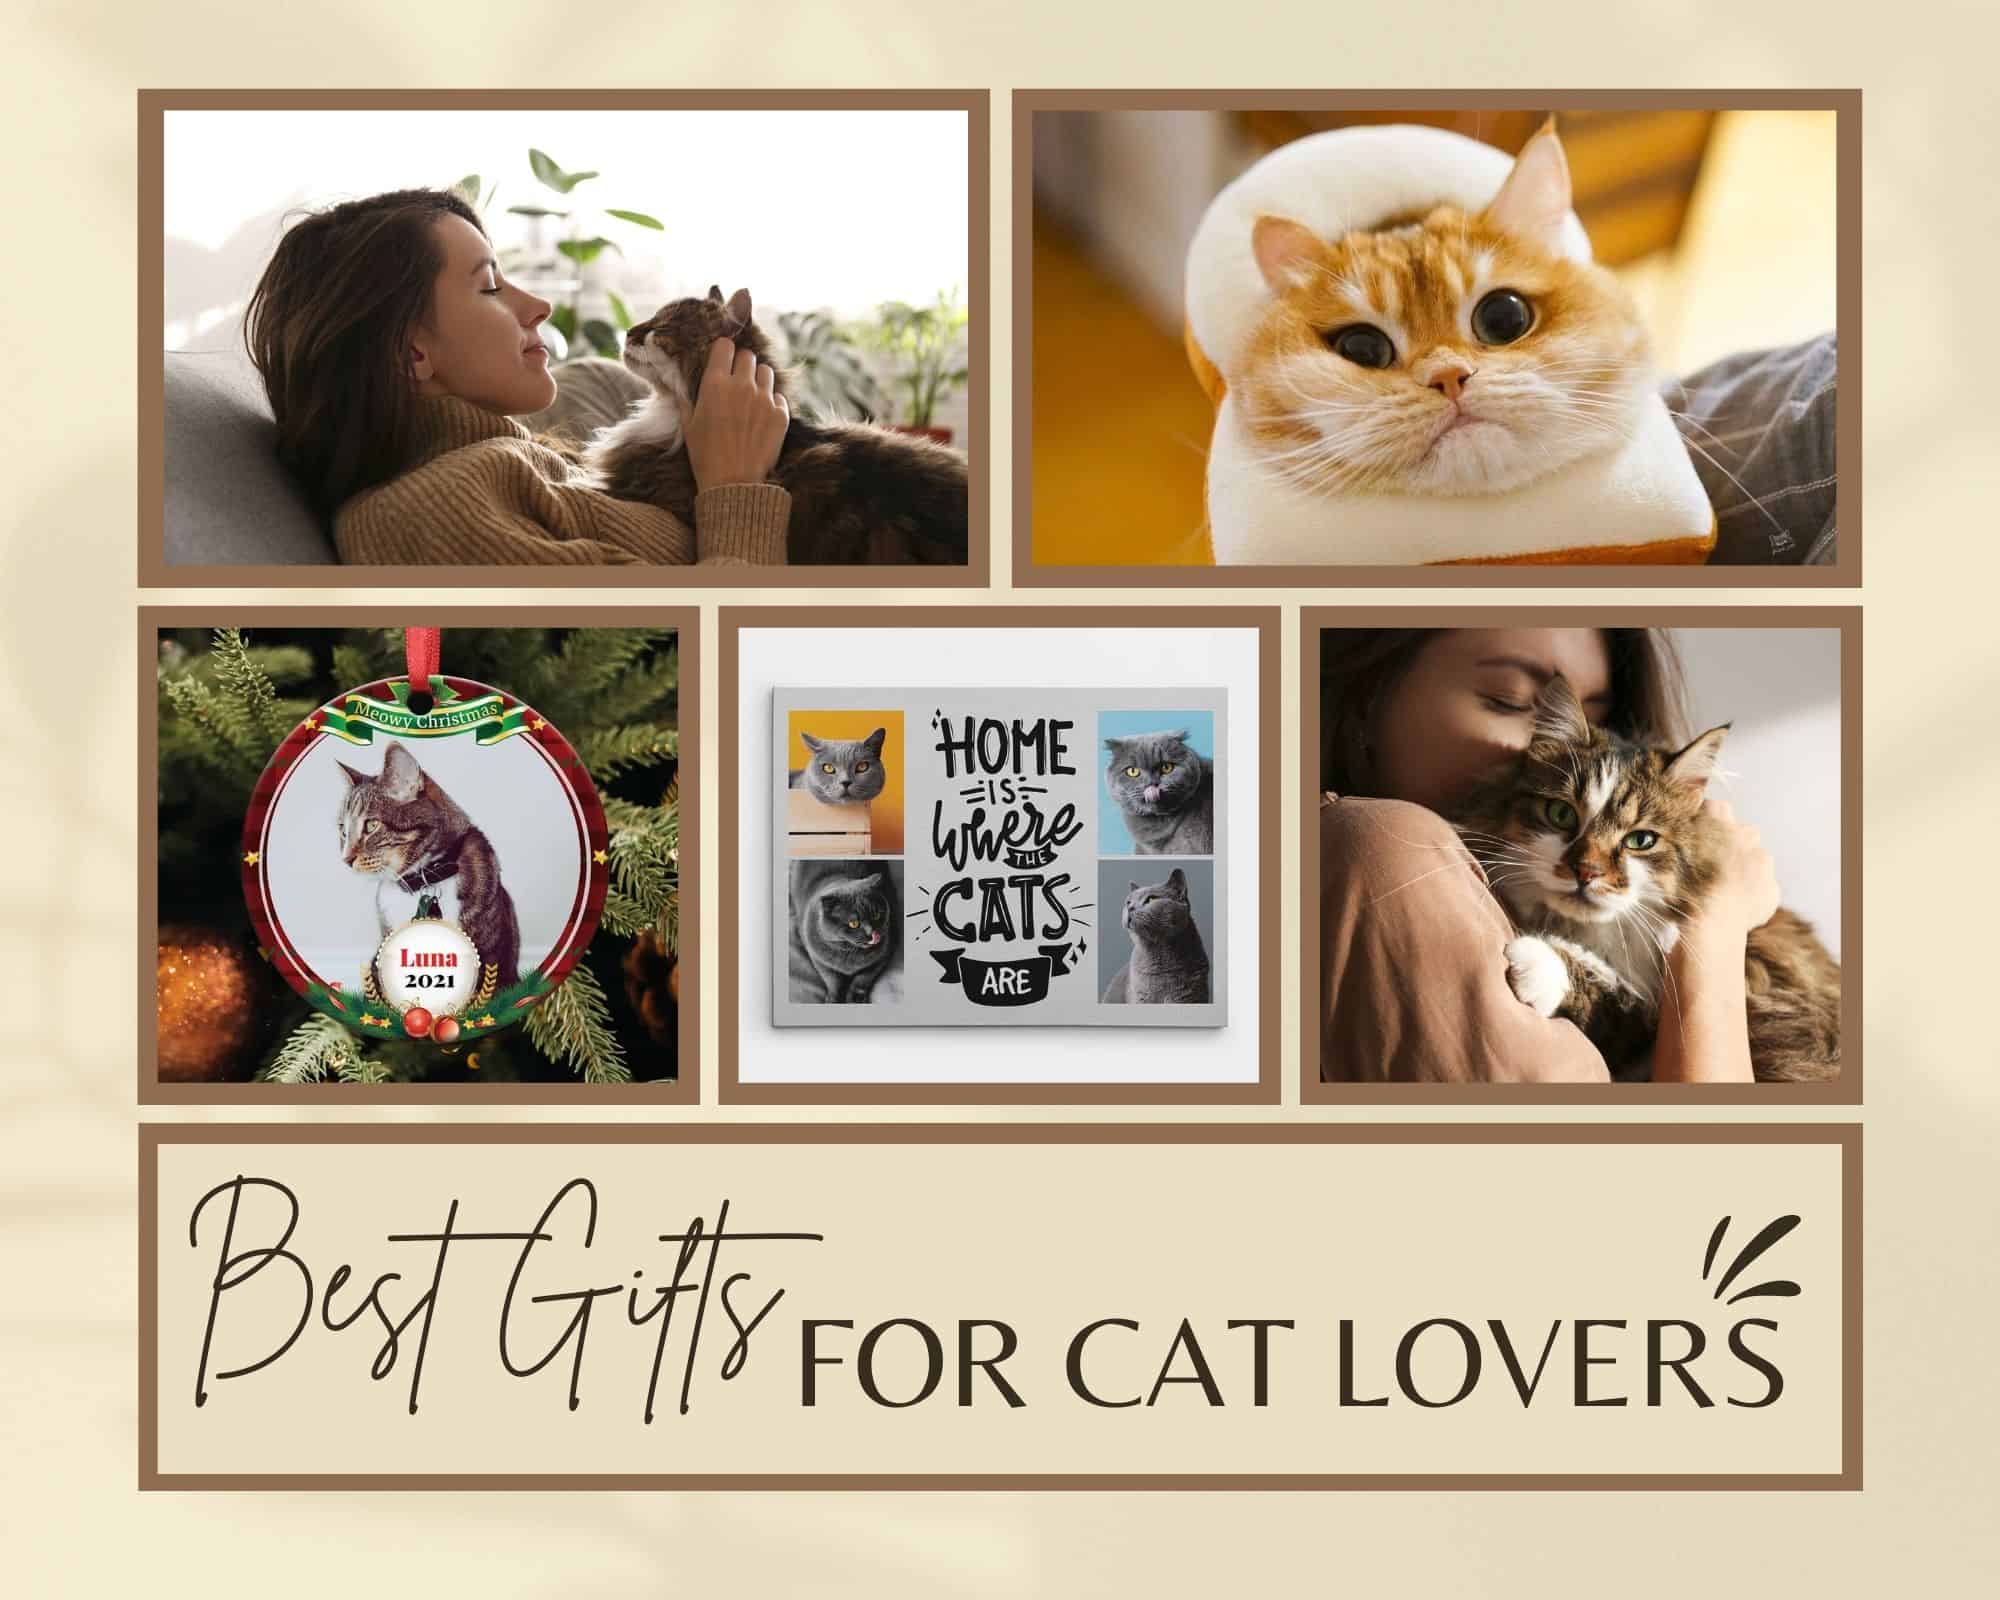 51 Best Gifts for Cat Lovers (2022): Cat-Themed Gifts for Cat Owners